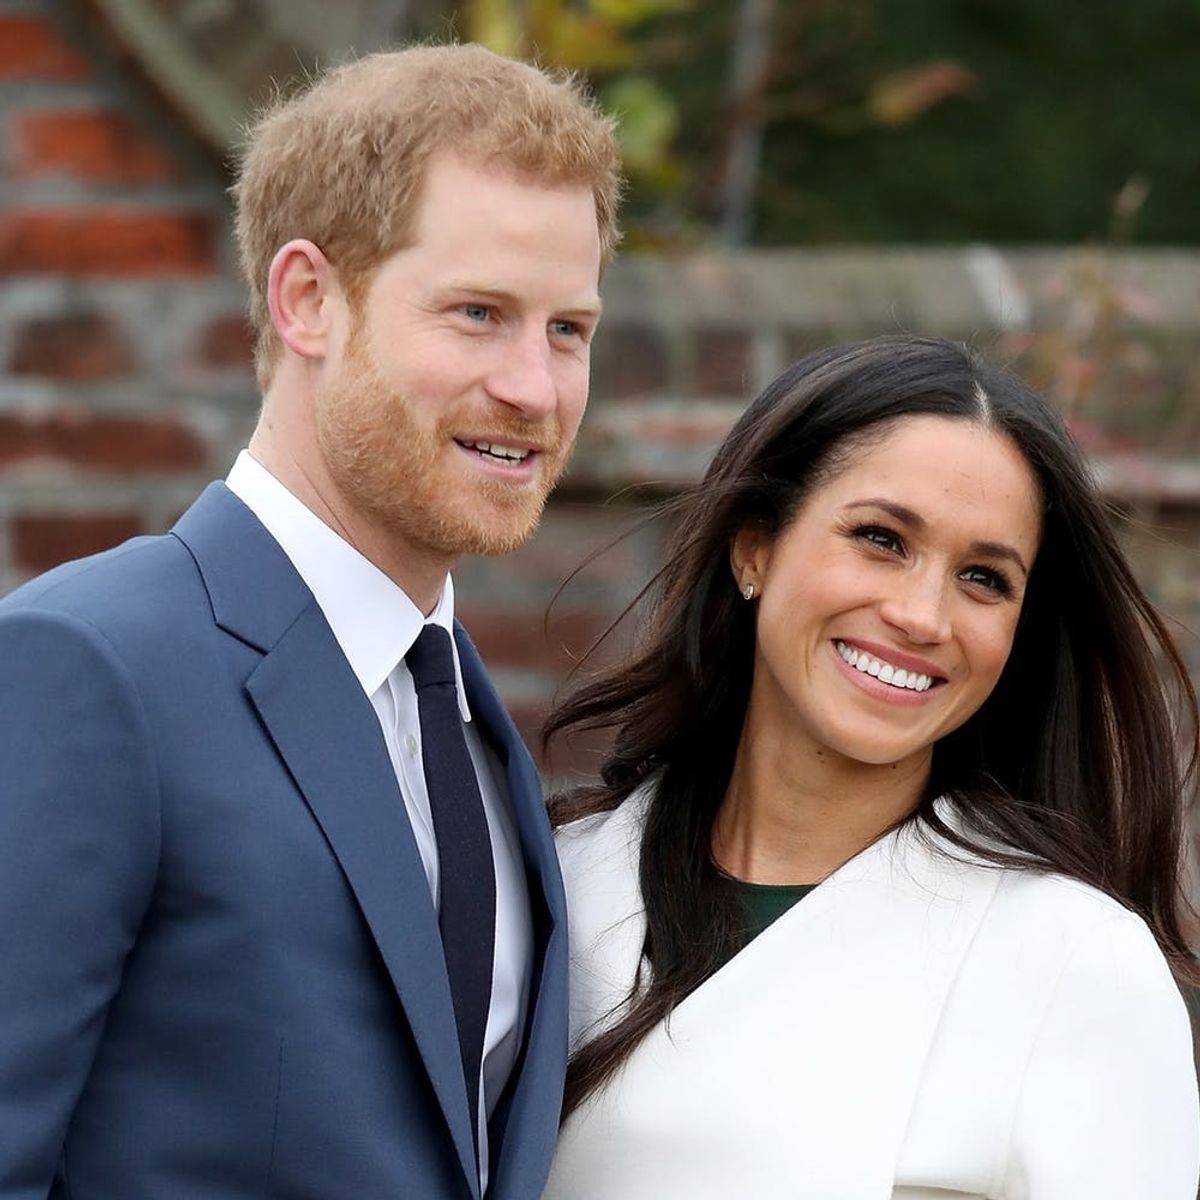 Prince Harry and Meghan Markle’s Engagement Sent Twitter into a Frenzy